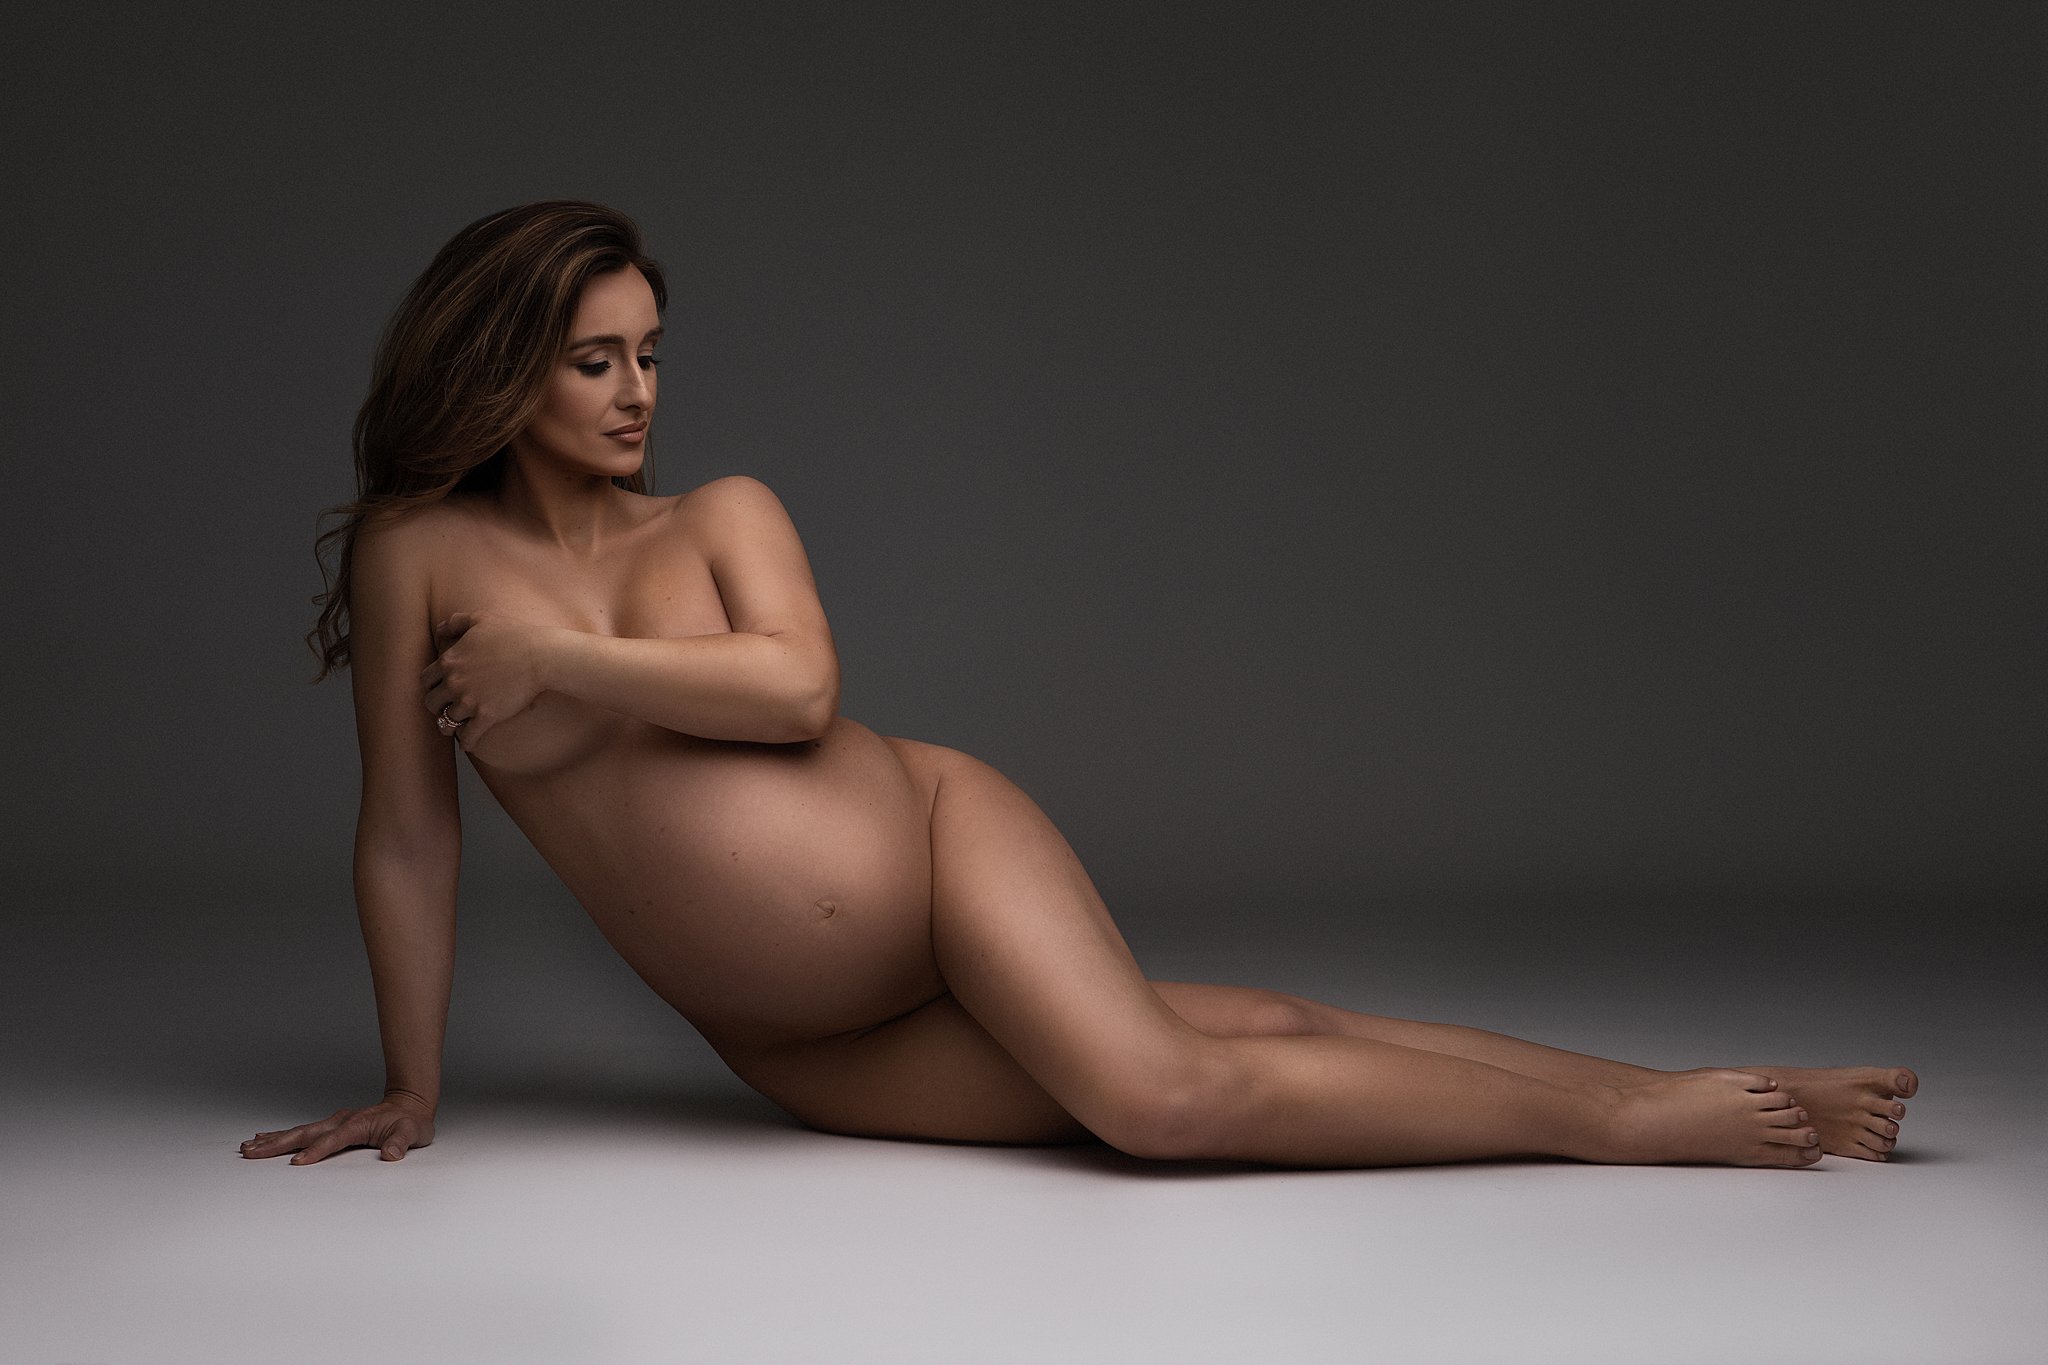 Naked mother to be covers herself with on arm while layin on a studio floor atlanta baby shower venue